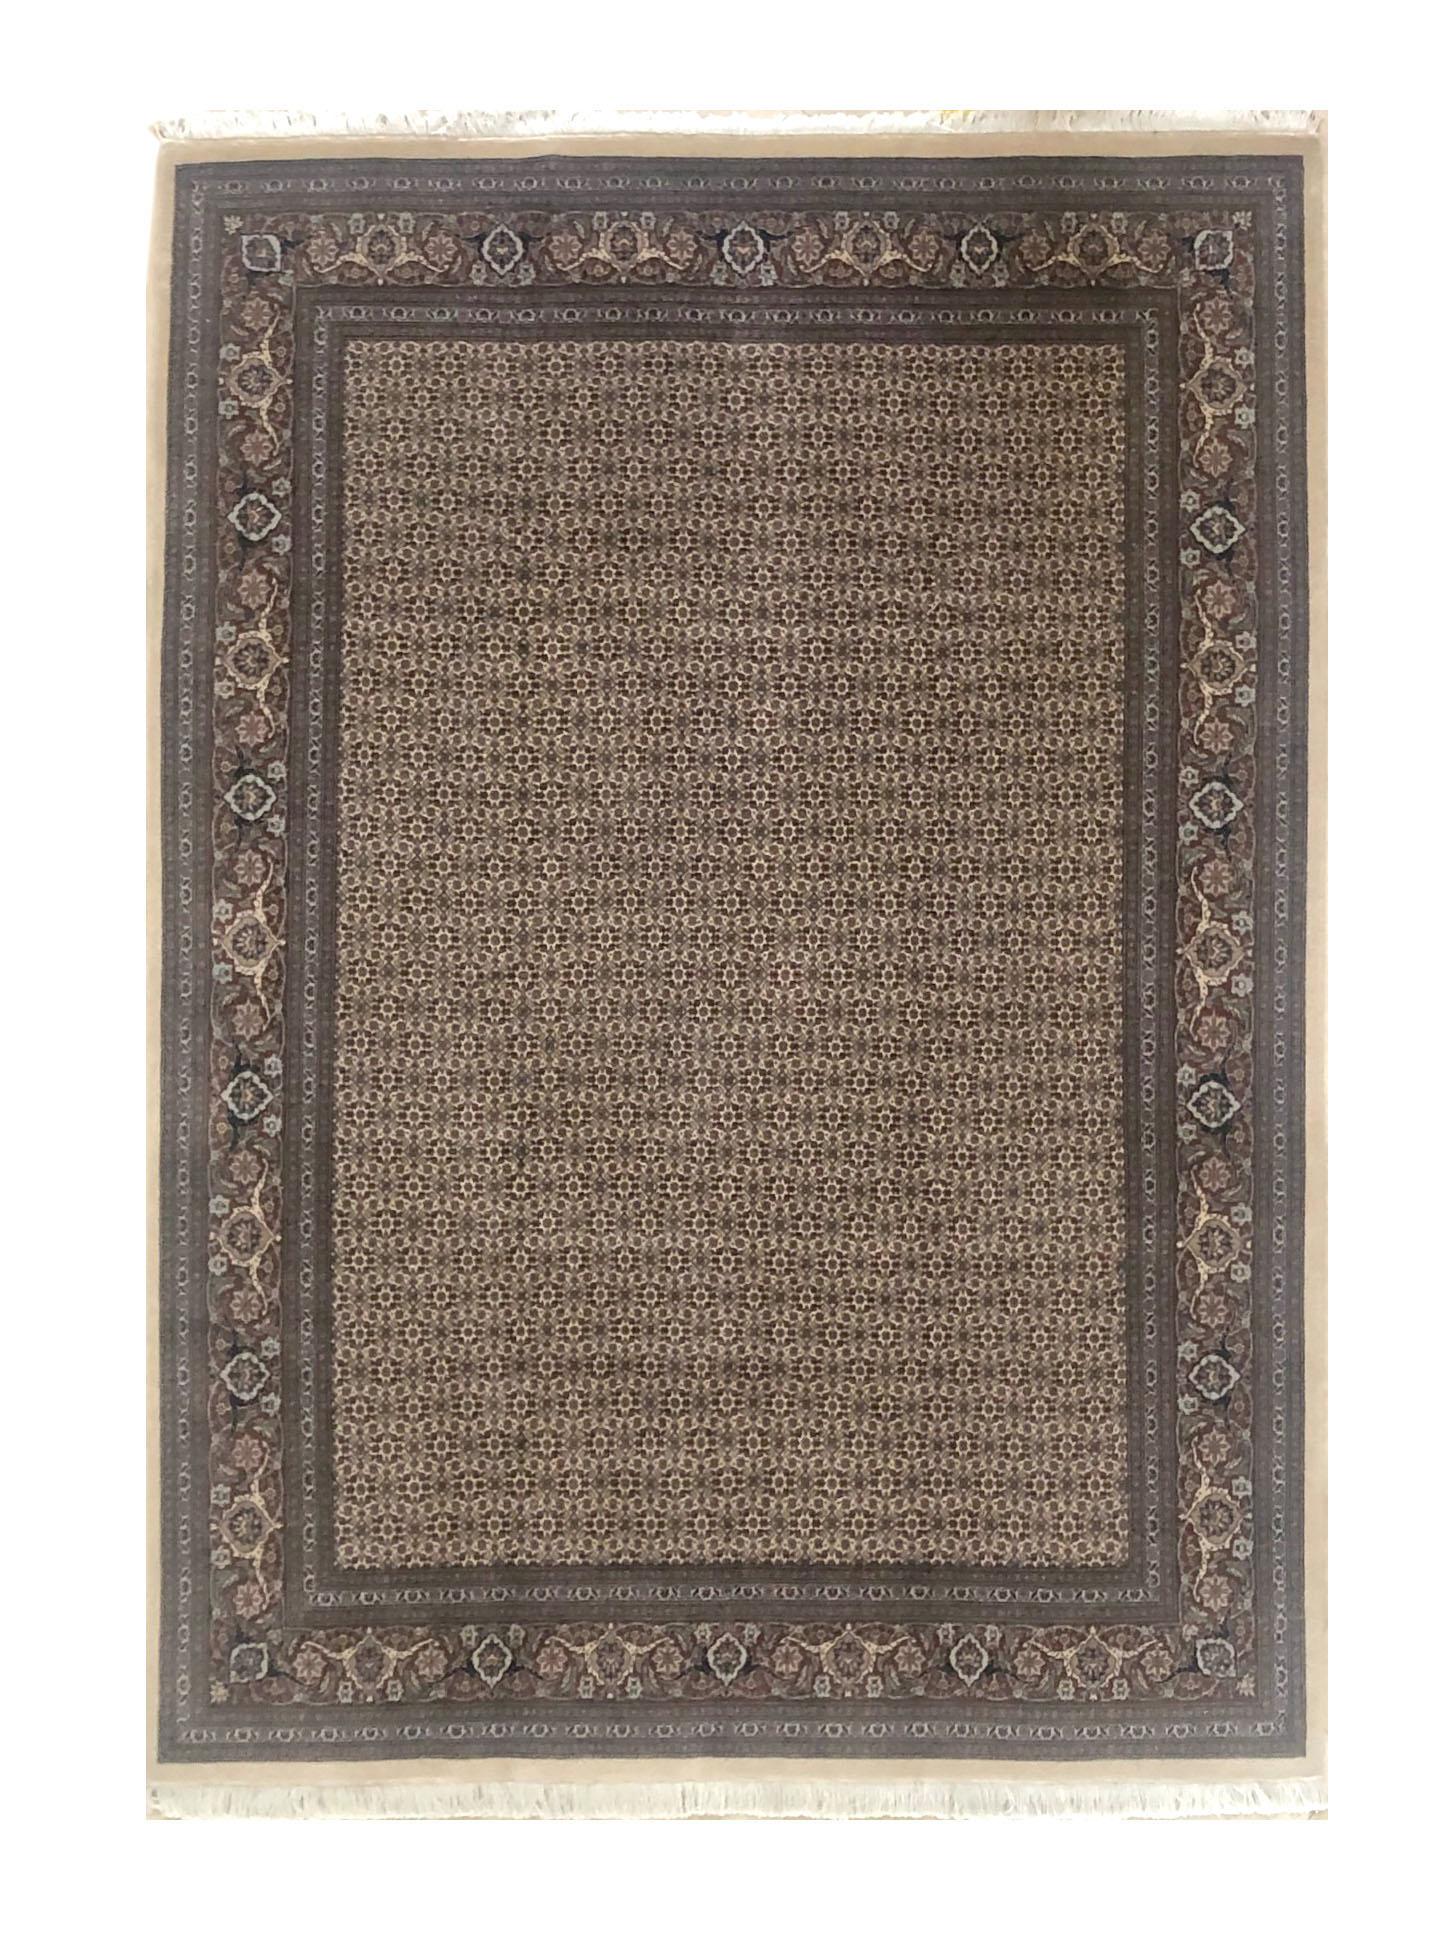 Authentic Persian Hand Knotted All-Over Fish Design 'Mahi' Tabriz Rug For Sale 6